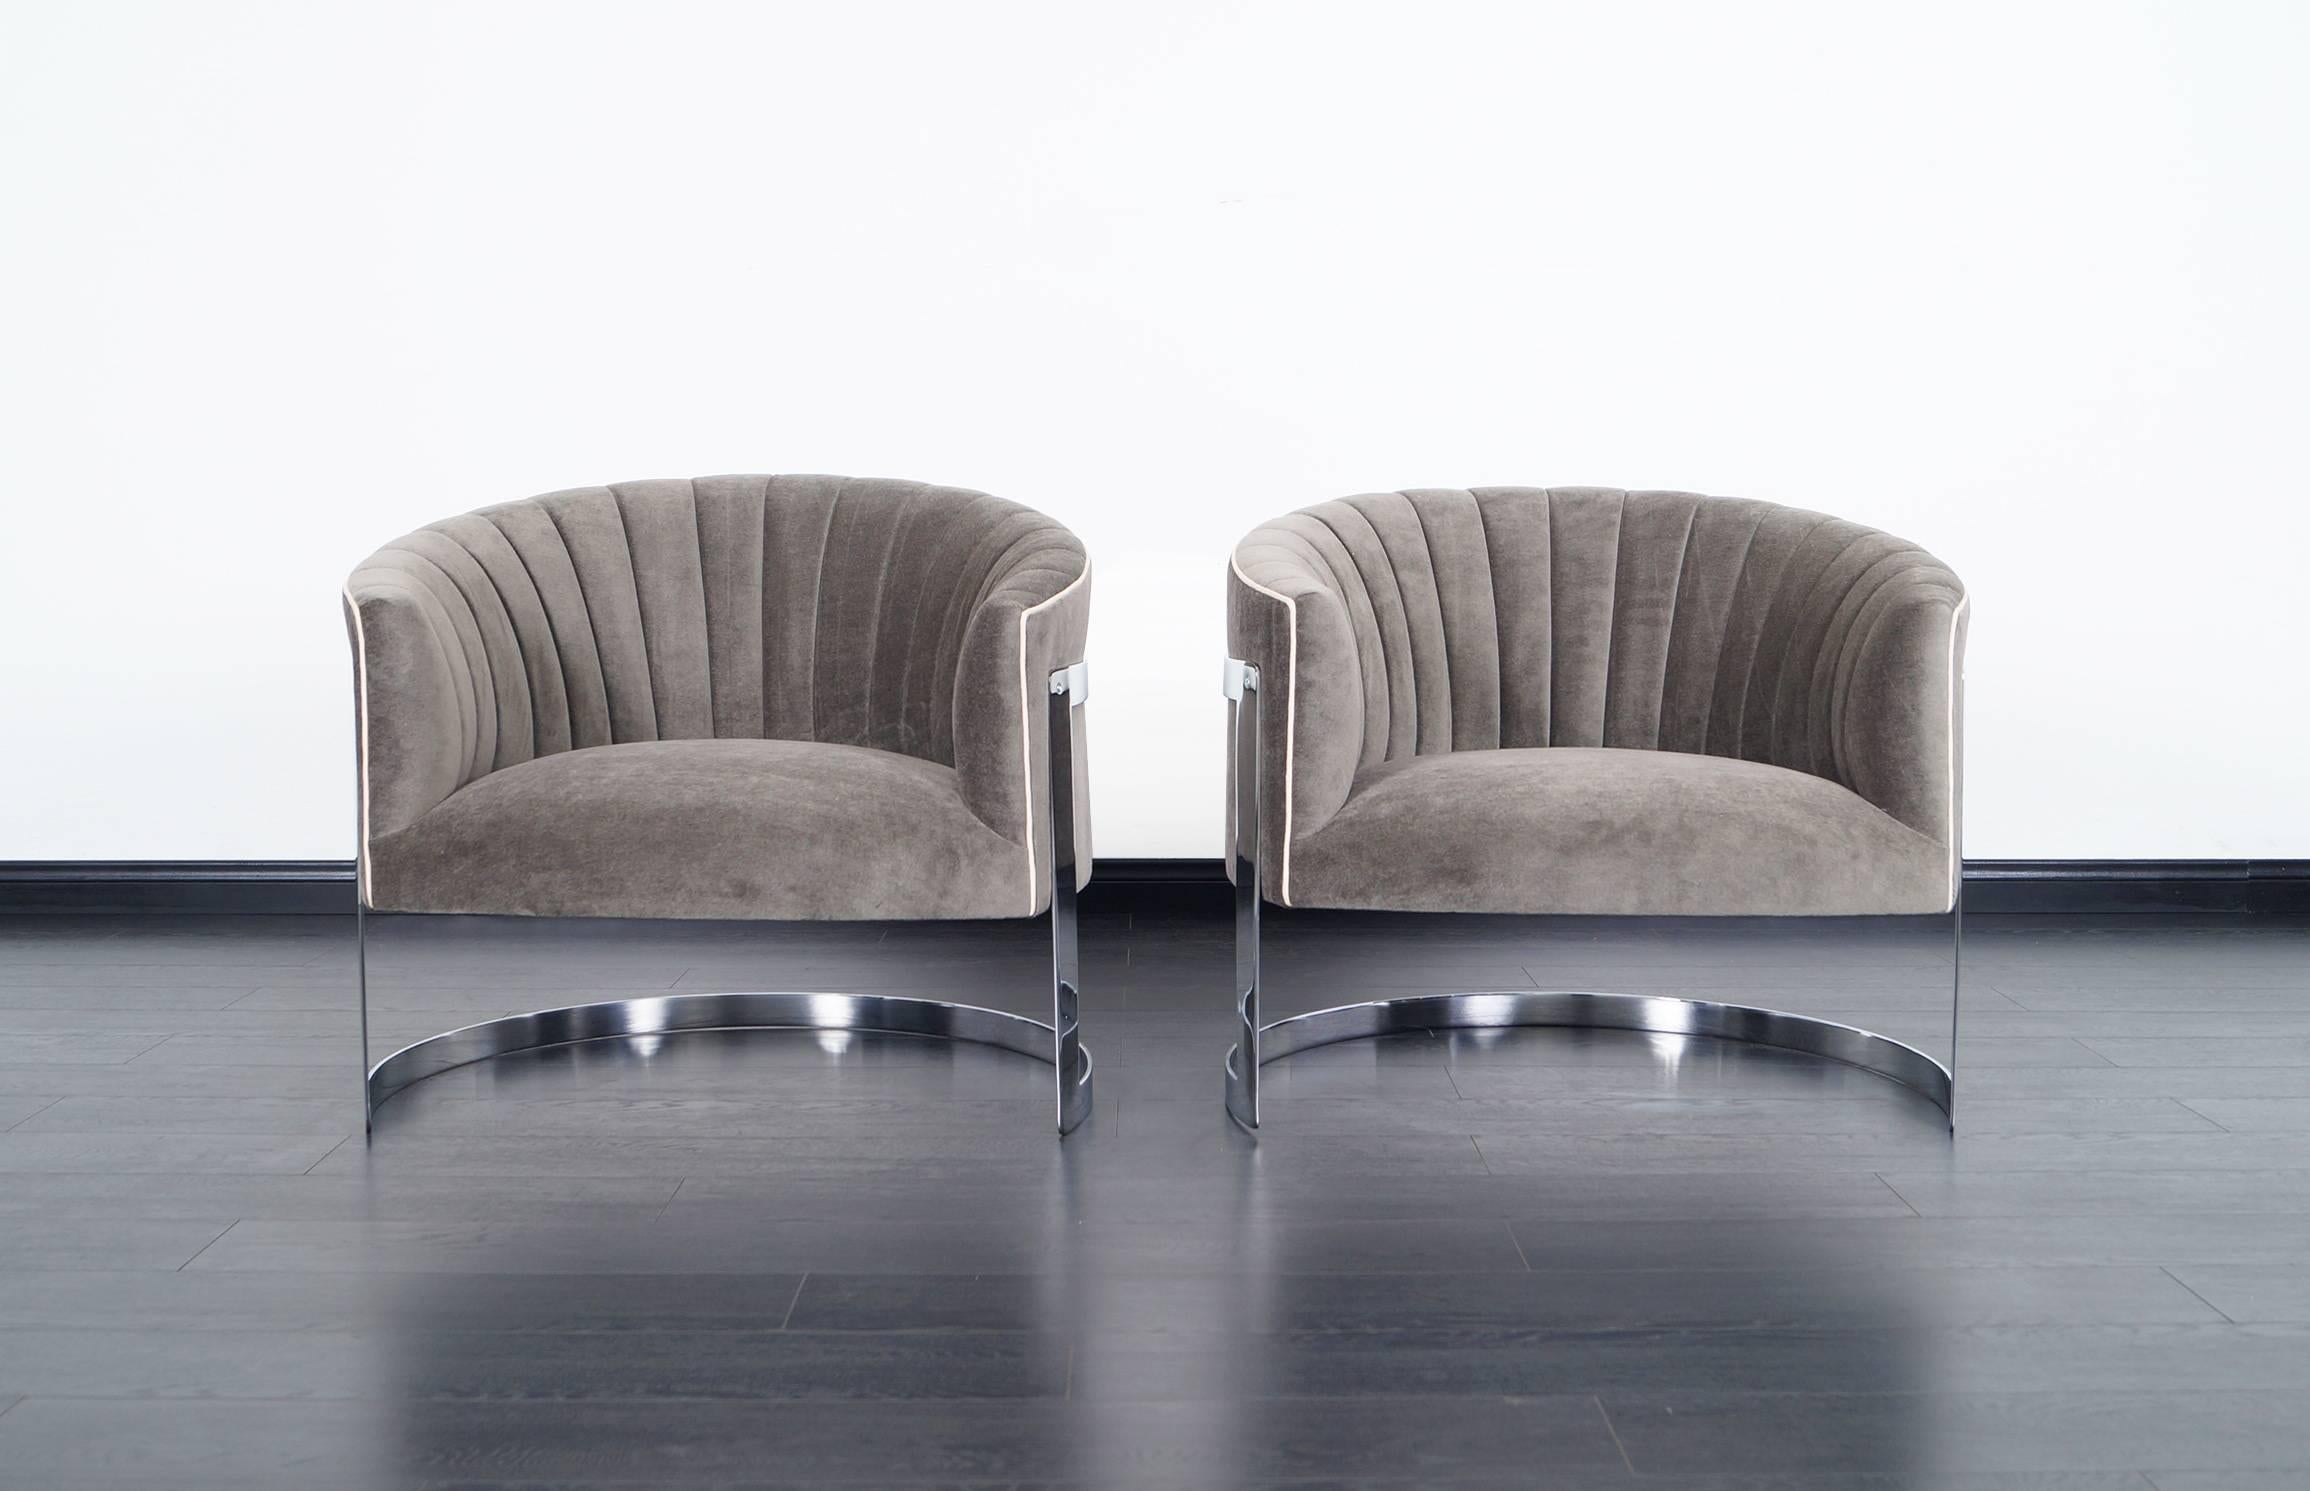 Pair of fabulous vintage "Barrel" Lounge chairs in the style of Milo Baughman for Thayer Coggin. Newly reupholstered in mohair with a channel back design.